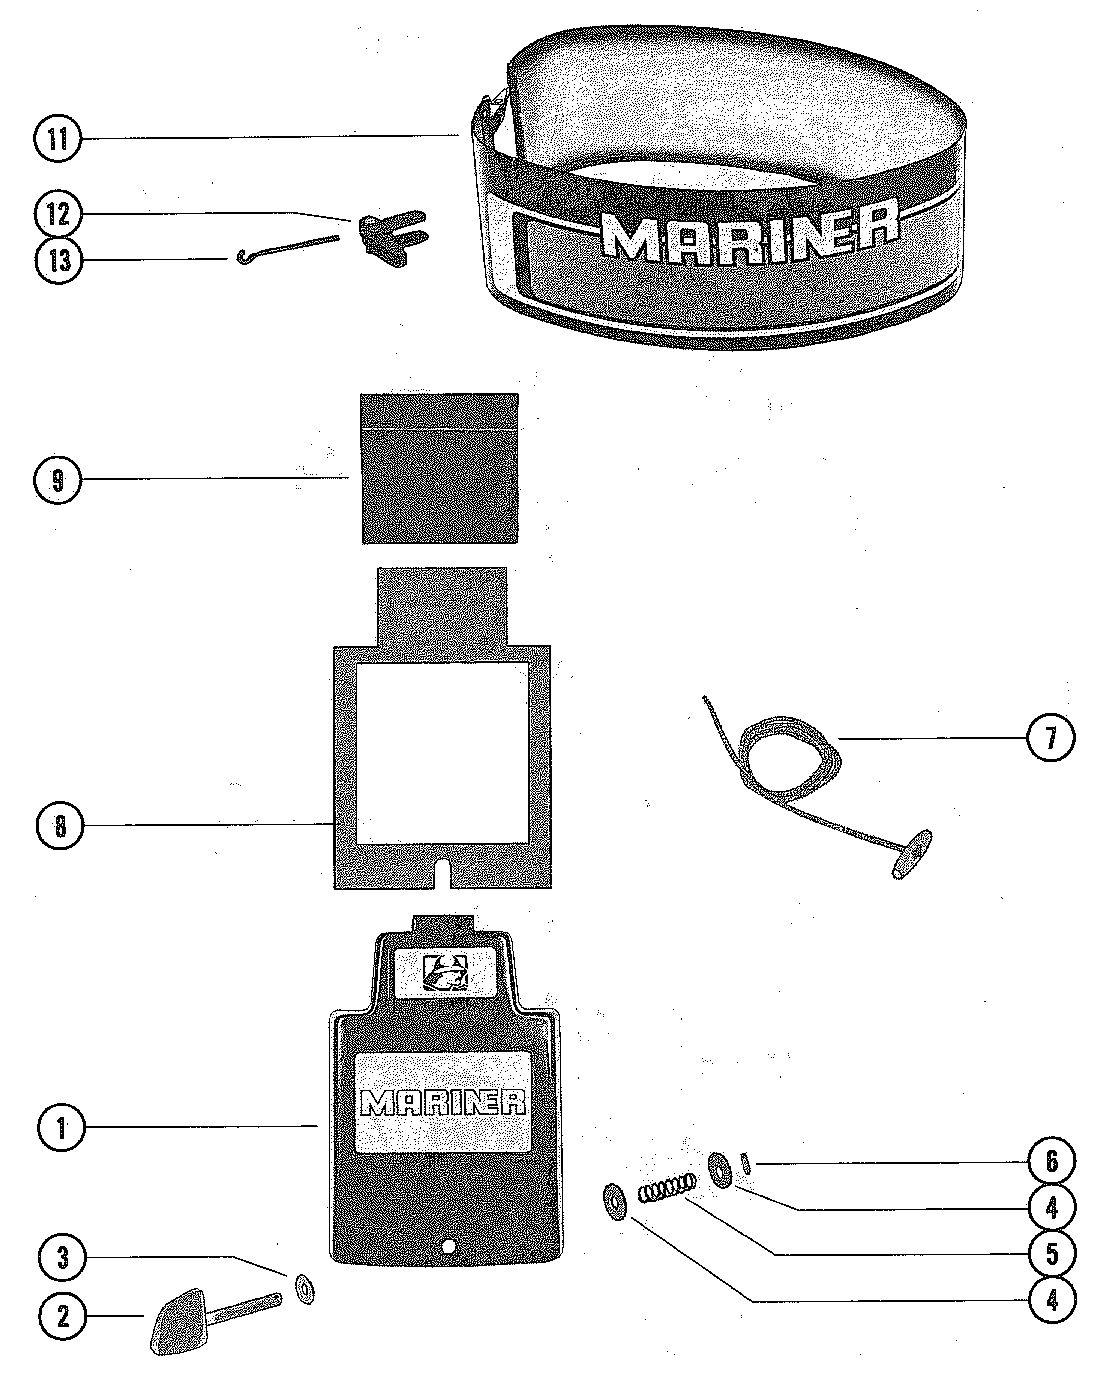 MARINER MARINER 85 COWLING AND FRONT COVER